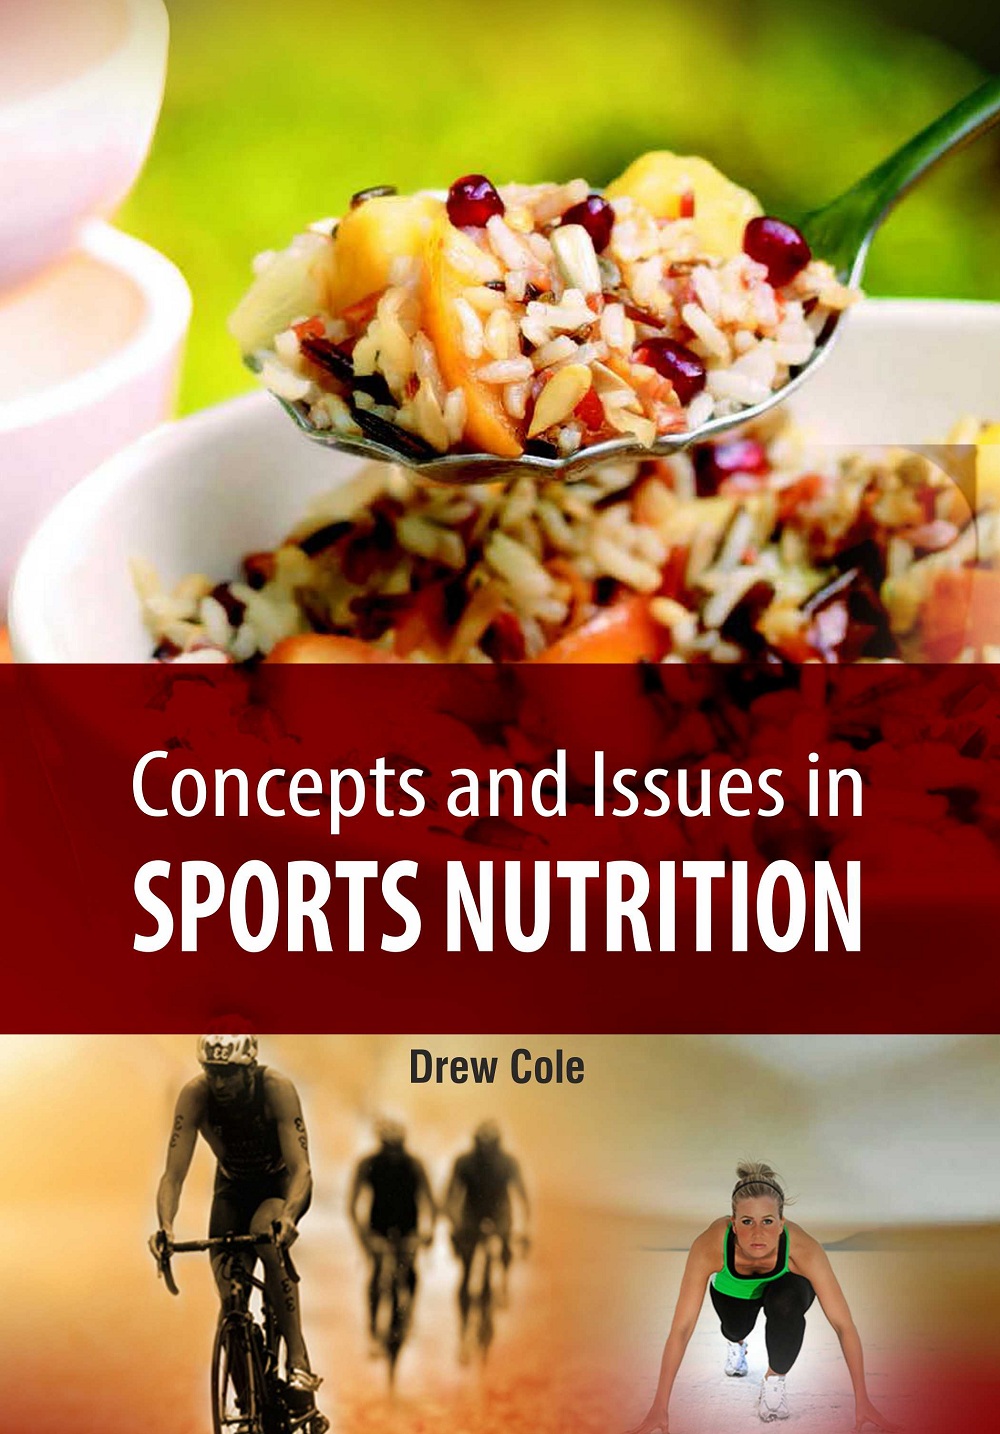 Concepts and Issues in Sports Nutrition